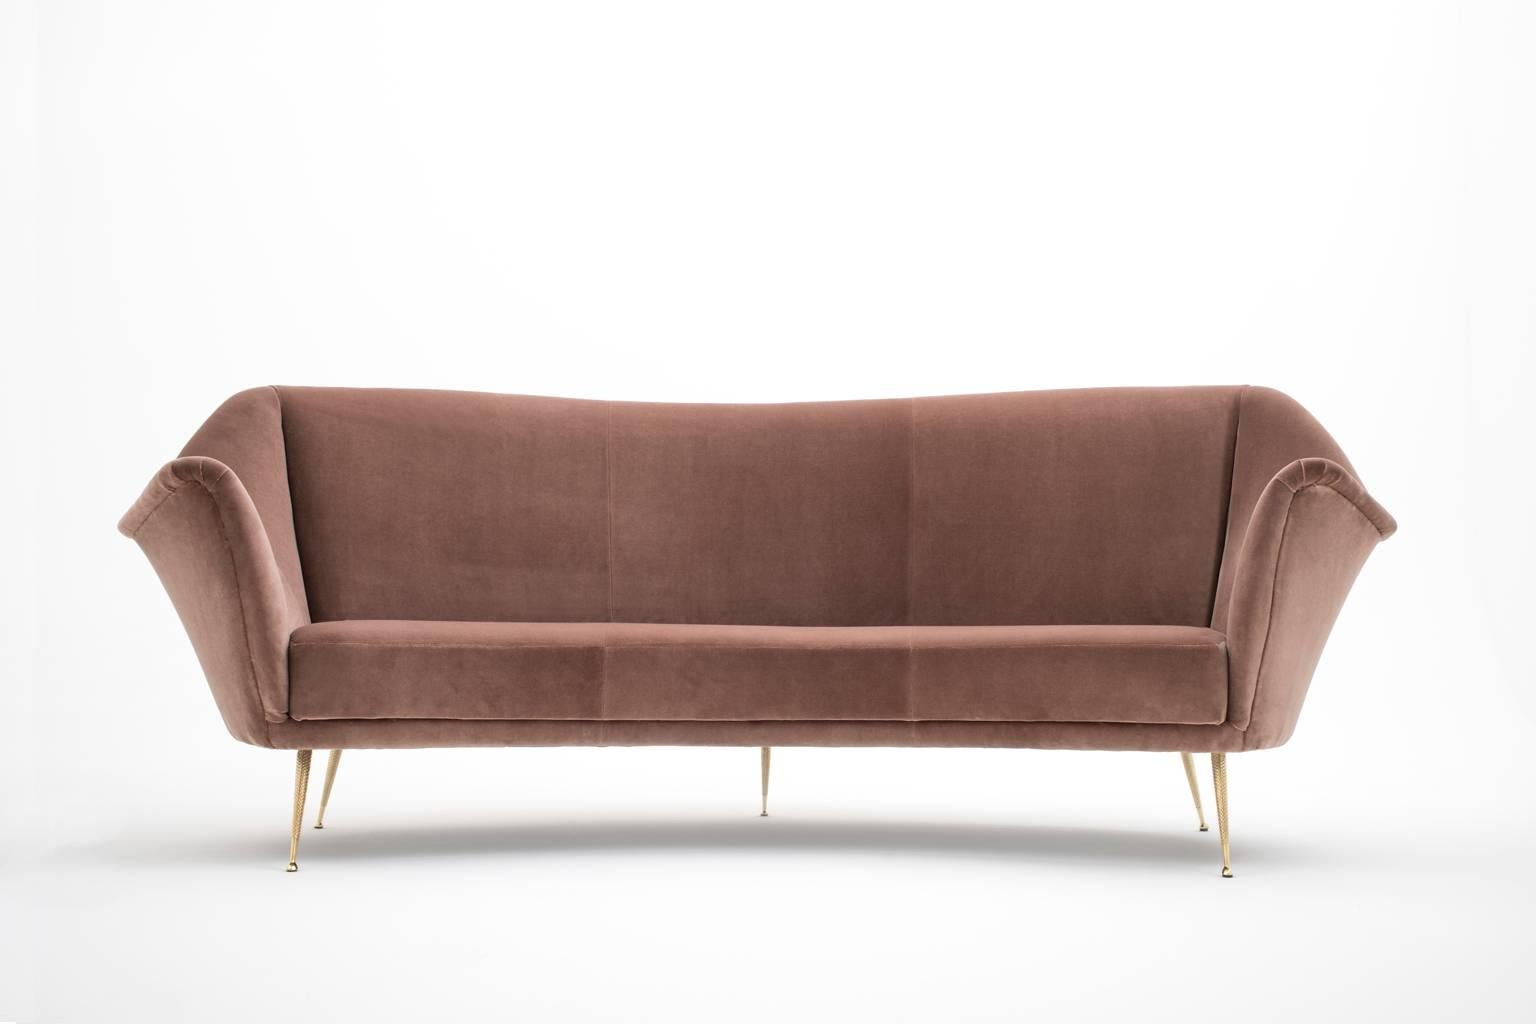 Stunning curved sofa by ISA Bergamo, Italy 1950s. Reupholstered in a high quality Mauve velvet which provides a nice warm and chic feeling. The sofa has nice distinctive solid brass feet with a geometric pattern. Very comfortable and relaxed